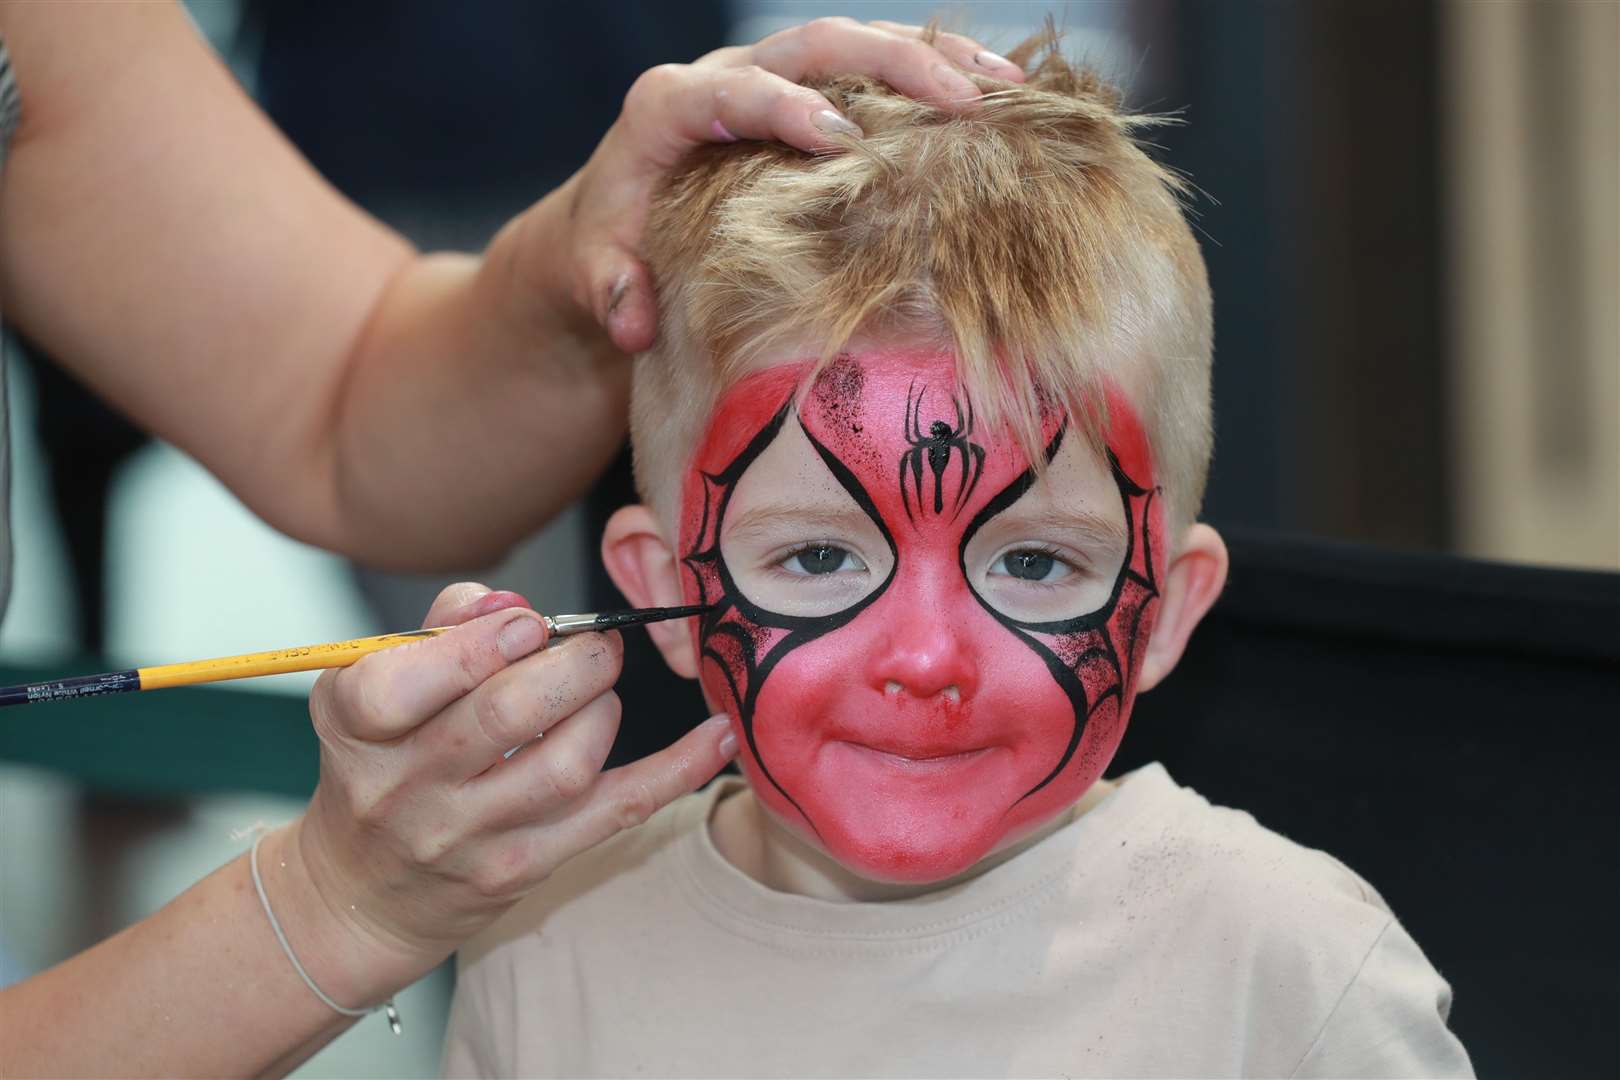 Ronnie Ward, four, gets his face painted at Hempstead Valley Shopping Centre. Picture: John Westhrop